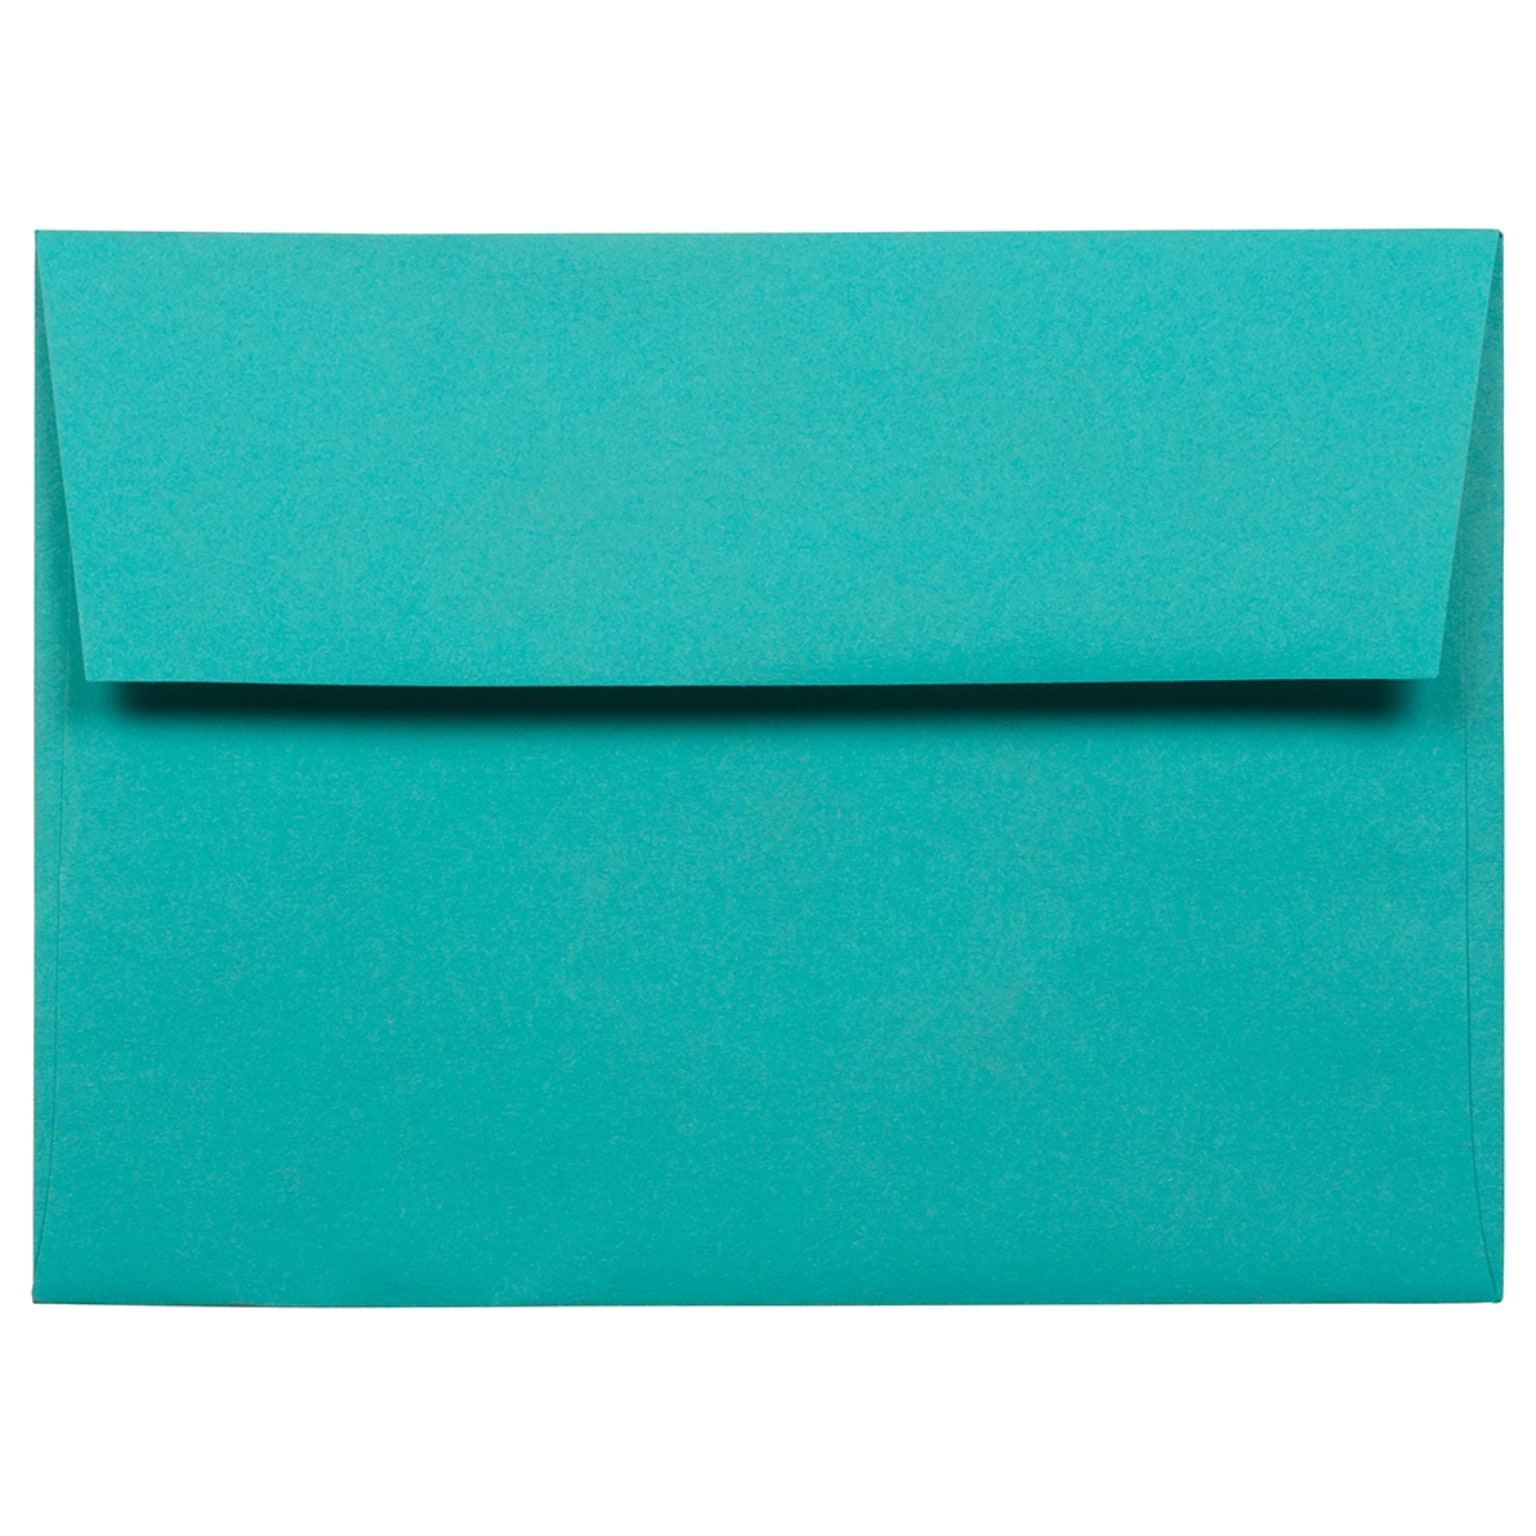 JAM Paper A6 Colored Invitation Envelopes, 4.75 x 6.5, Sea Blue Recycled, 25/Pack (15903)